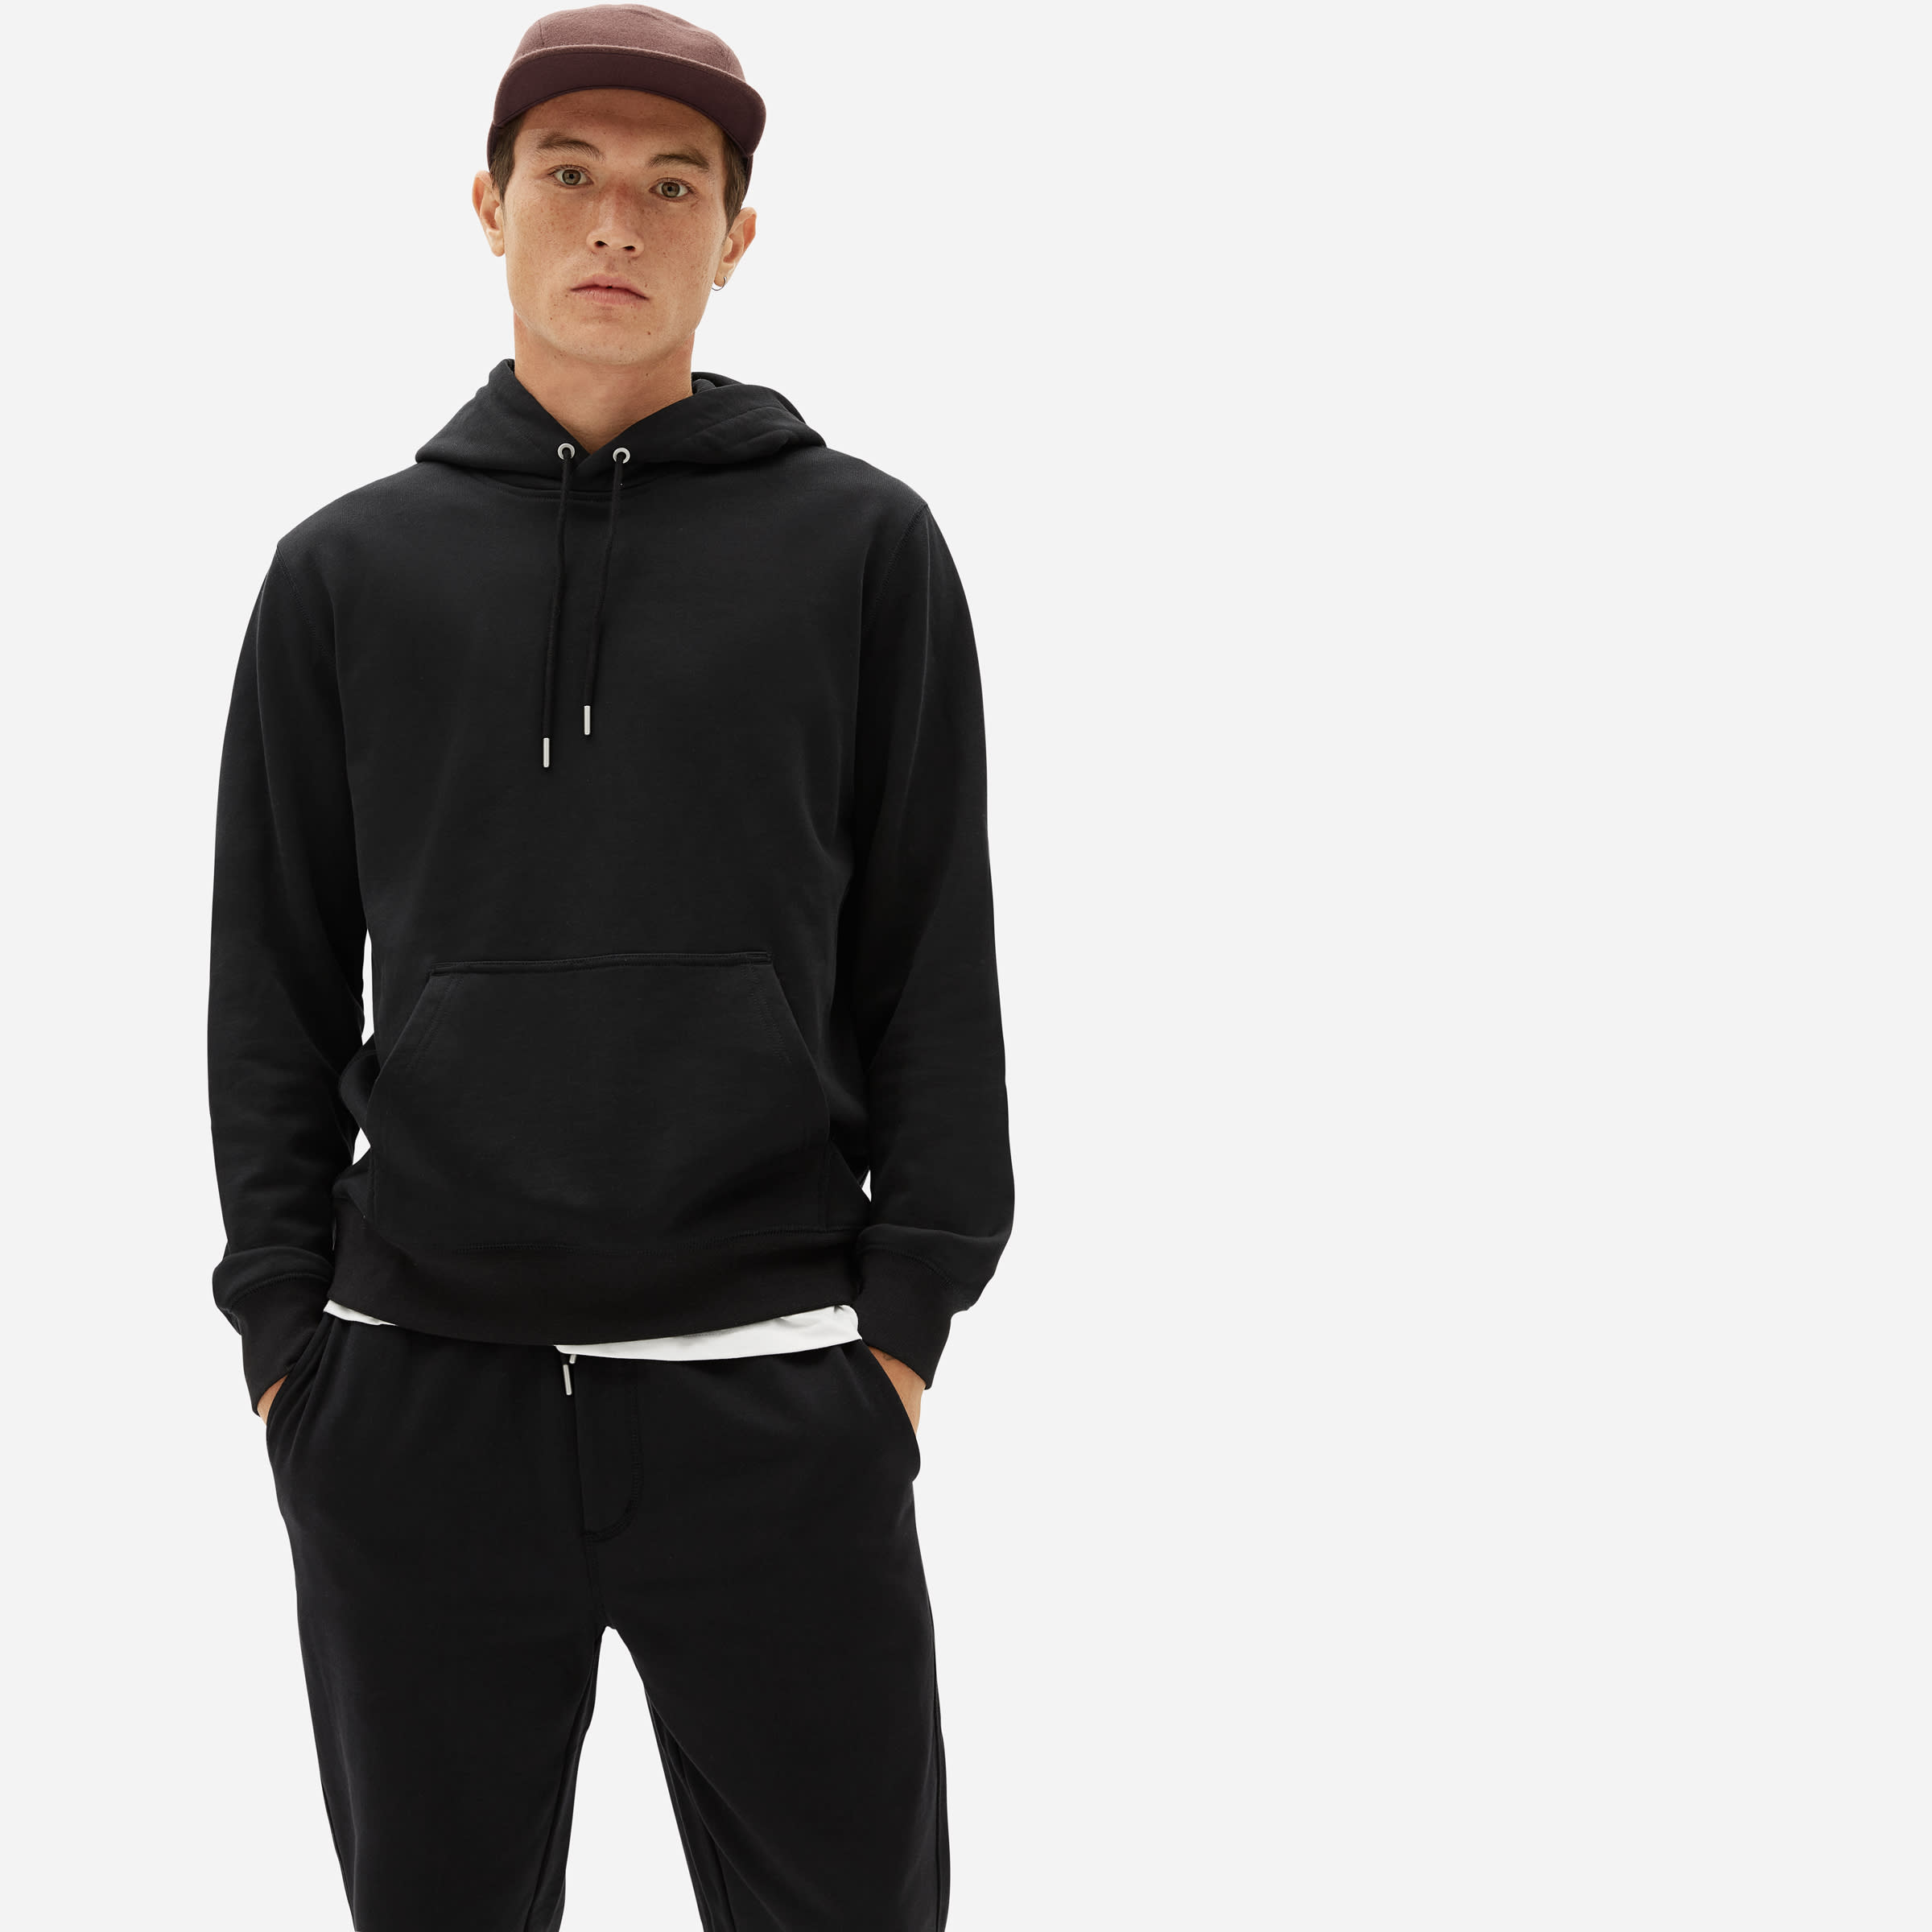 H4X BASEWEAR BLACK UNISEX FRENCH TERRY HOODIE